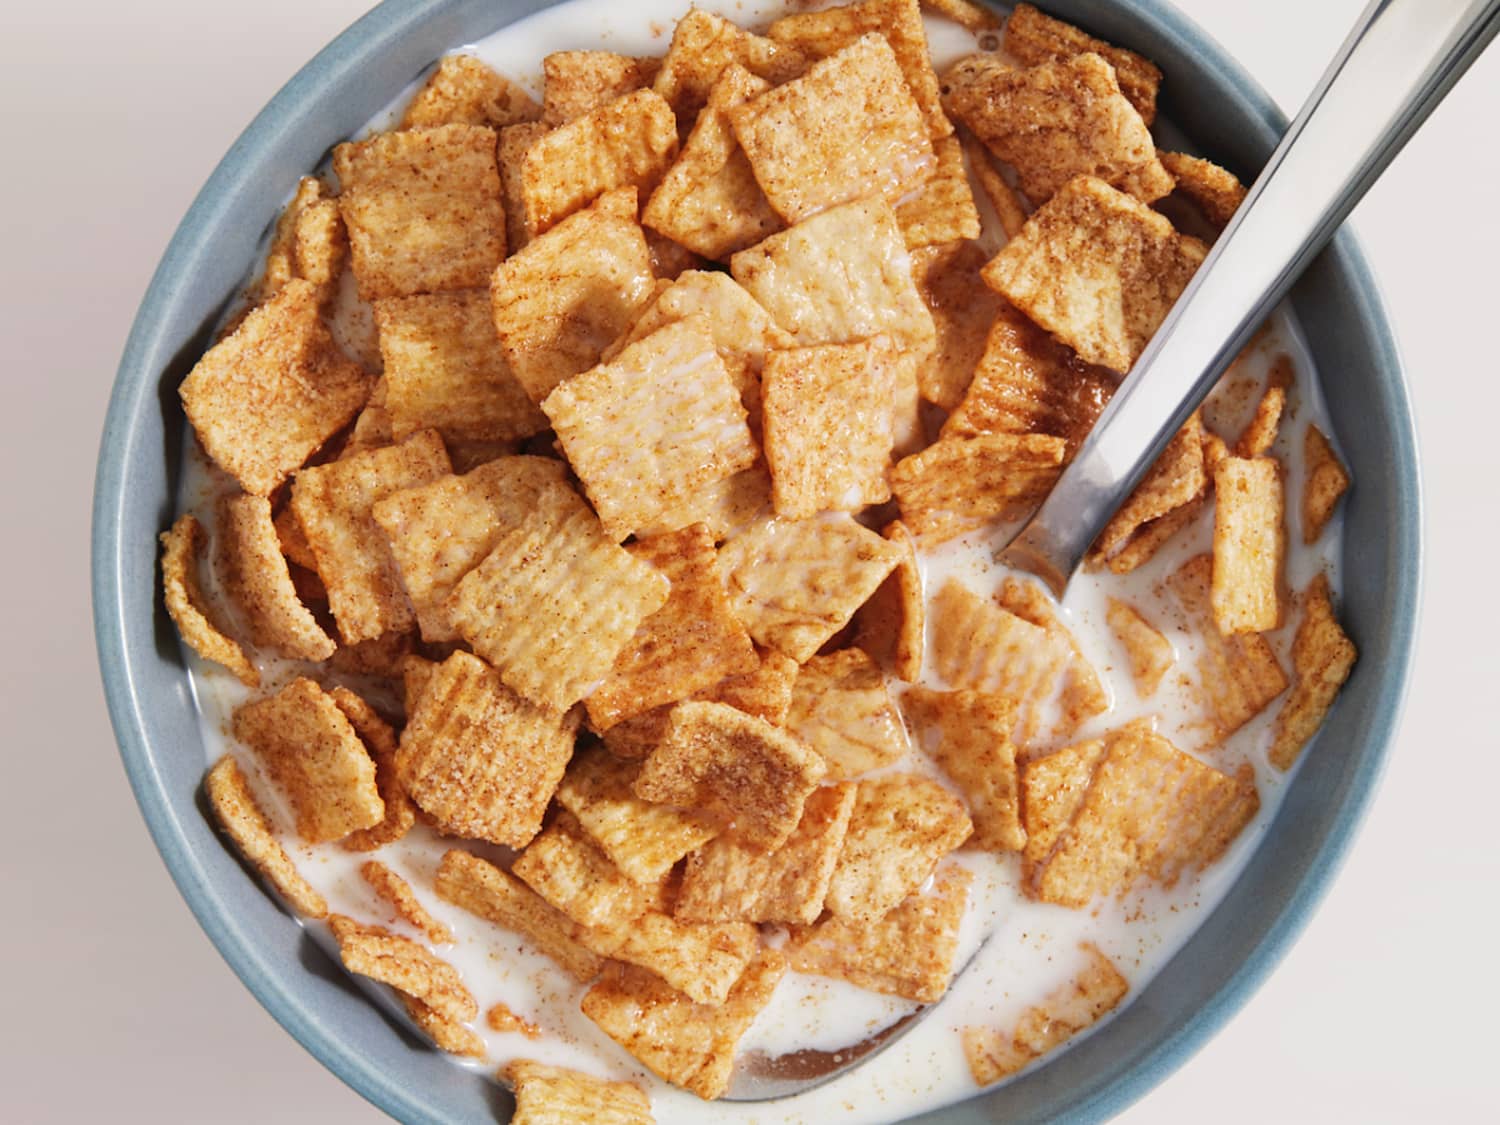 Cinnamon Toast Crunch cereal in a bowl